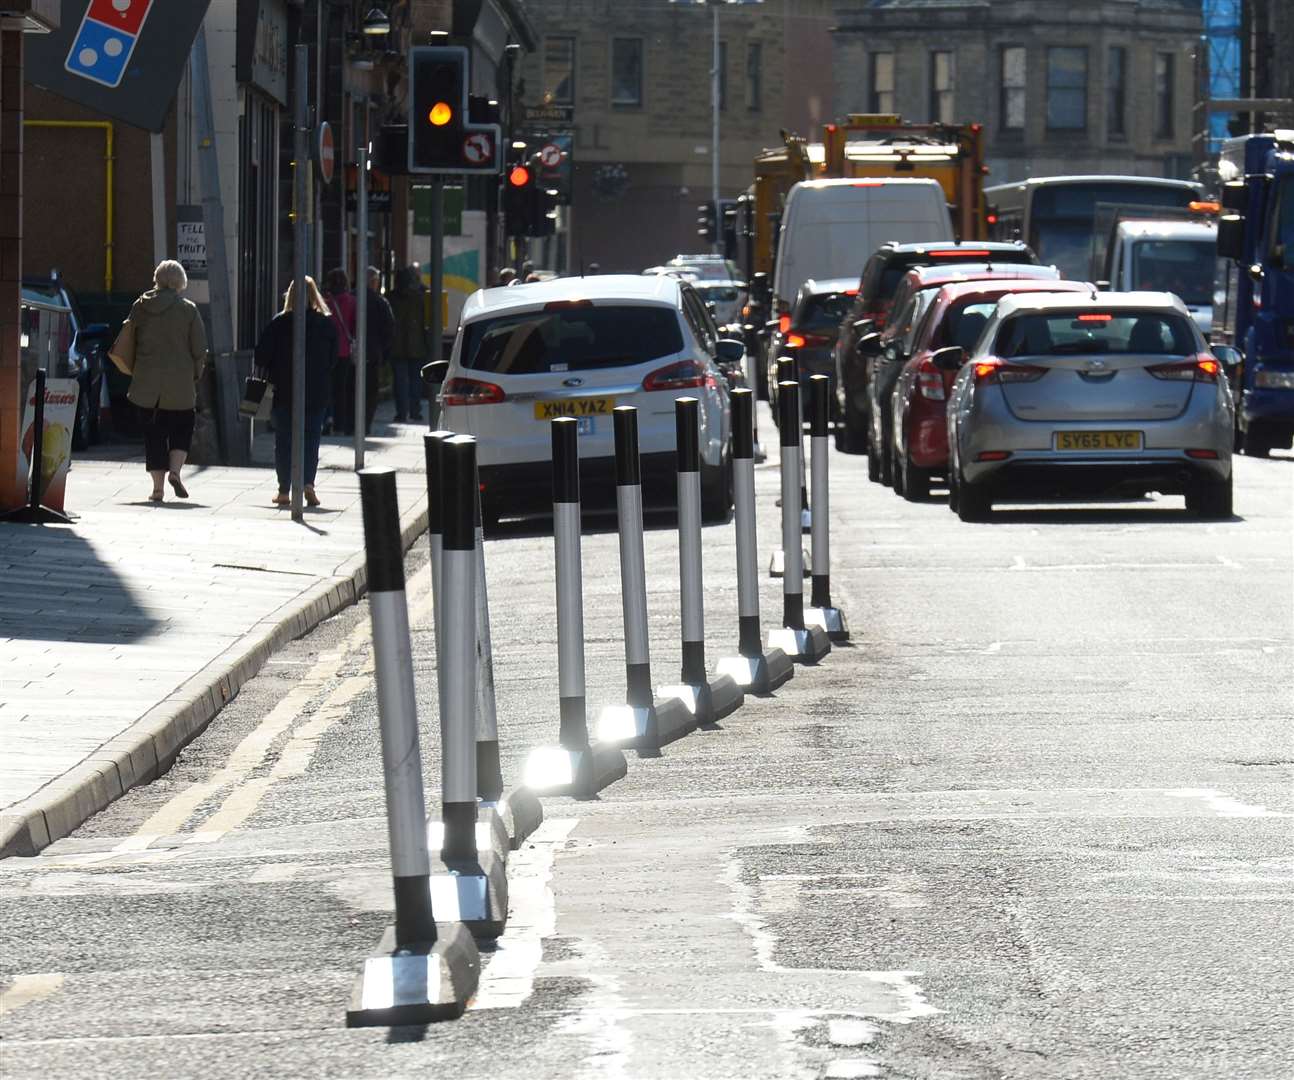 Spaces for People bollards and barriers that helped give rise to the proposed Academy Street changes. Picture Gary Anthony.